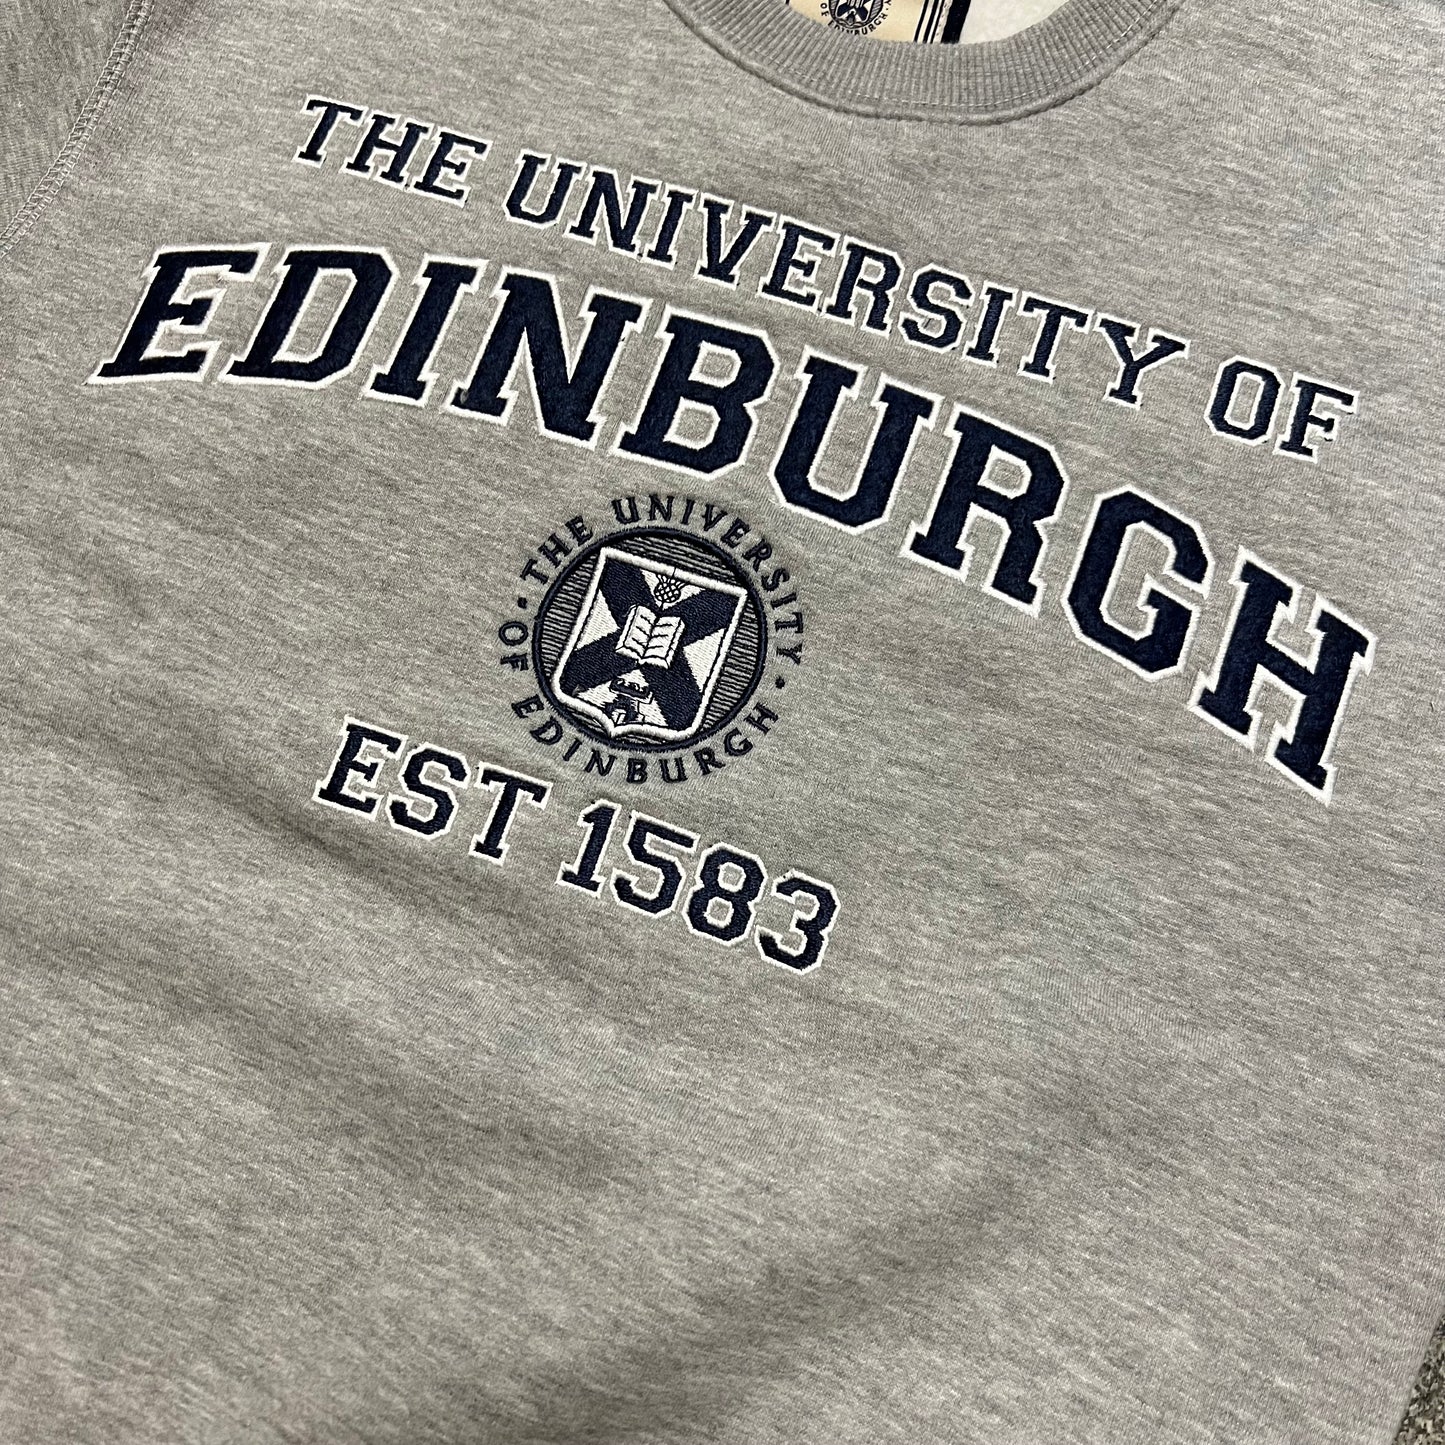 Close up of chest embroidery, which read 'the university of edinburgh, est 1583' and features the university crest in bold navy